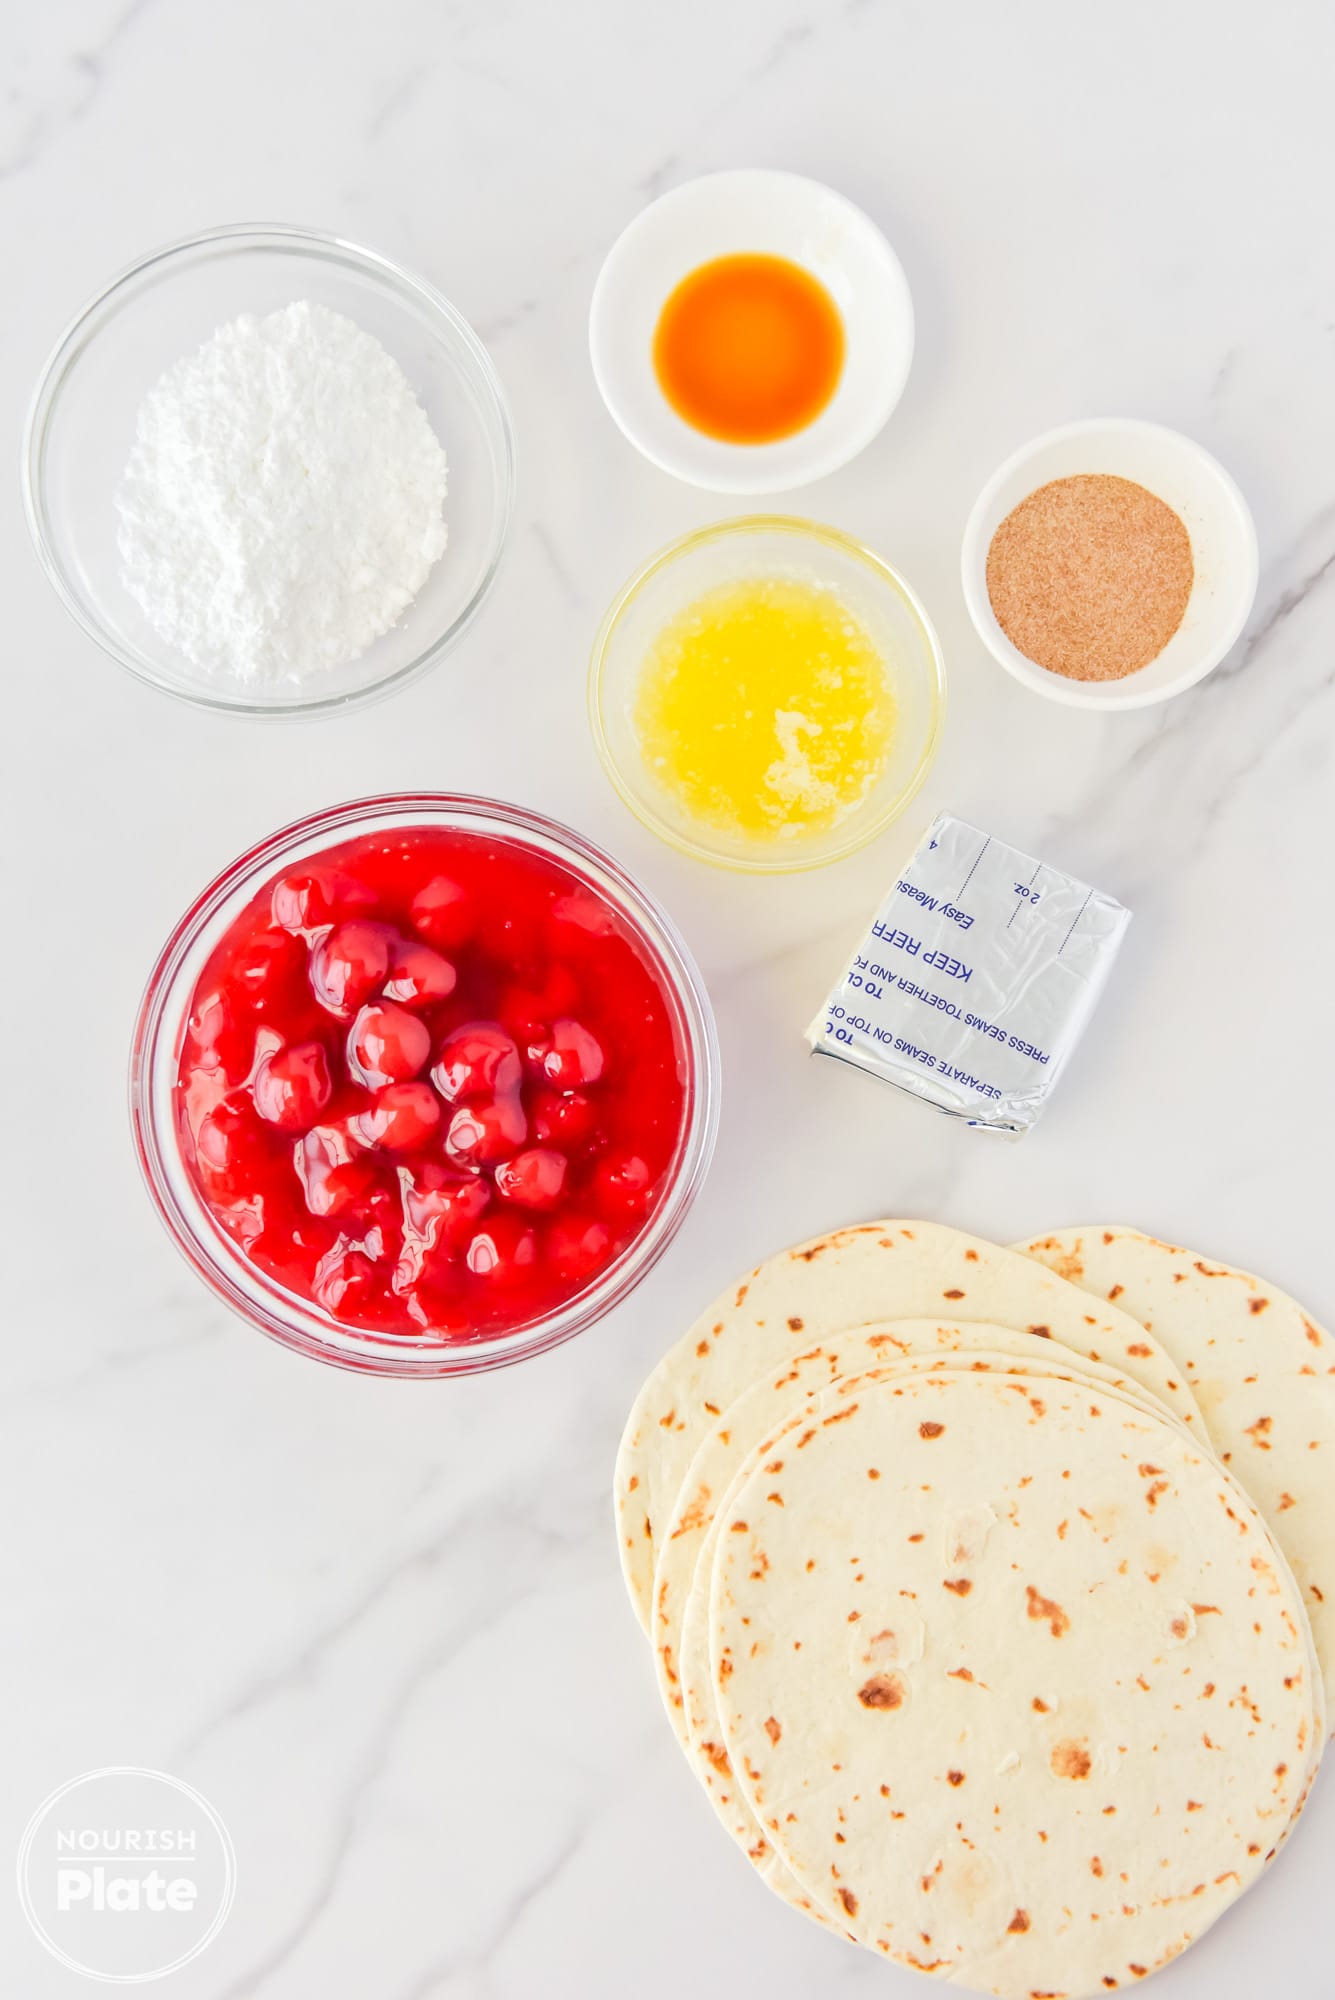 Ingredients needed to make cherry cheesecake, taquitos, including cherry pie, filling, flour, tortillas, cream cheese, powdered sugar, butter, cinnamon, sugar, and vanilla extract